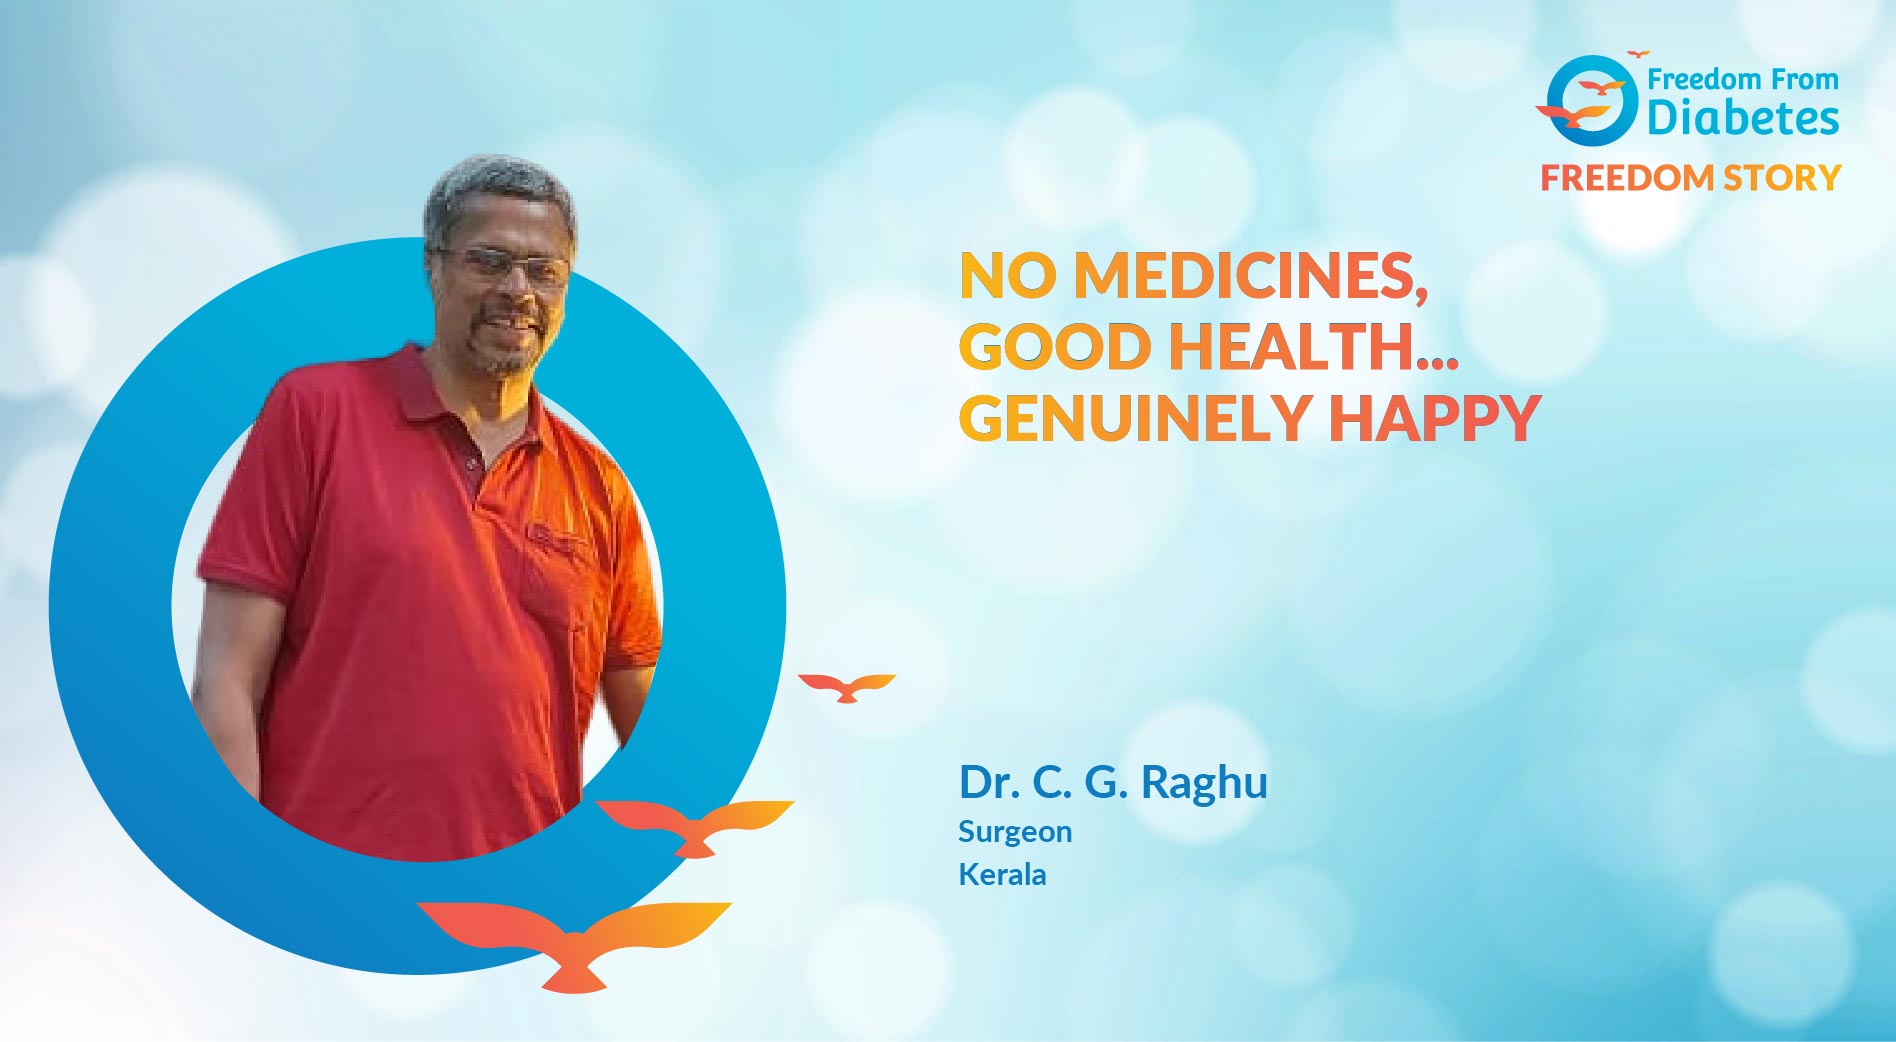 Dr. C. G. Raghu: Surgeon's story of diabetes reversal with FFD